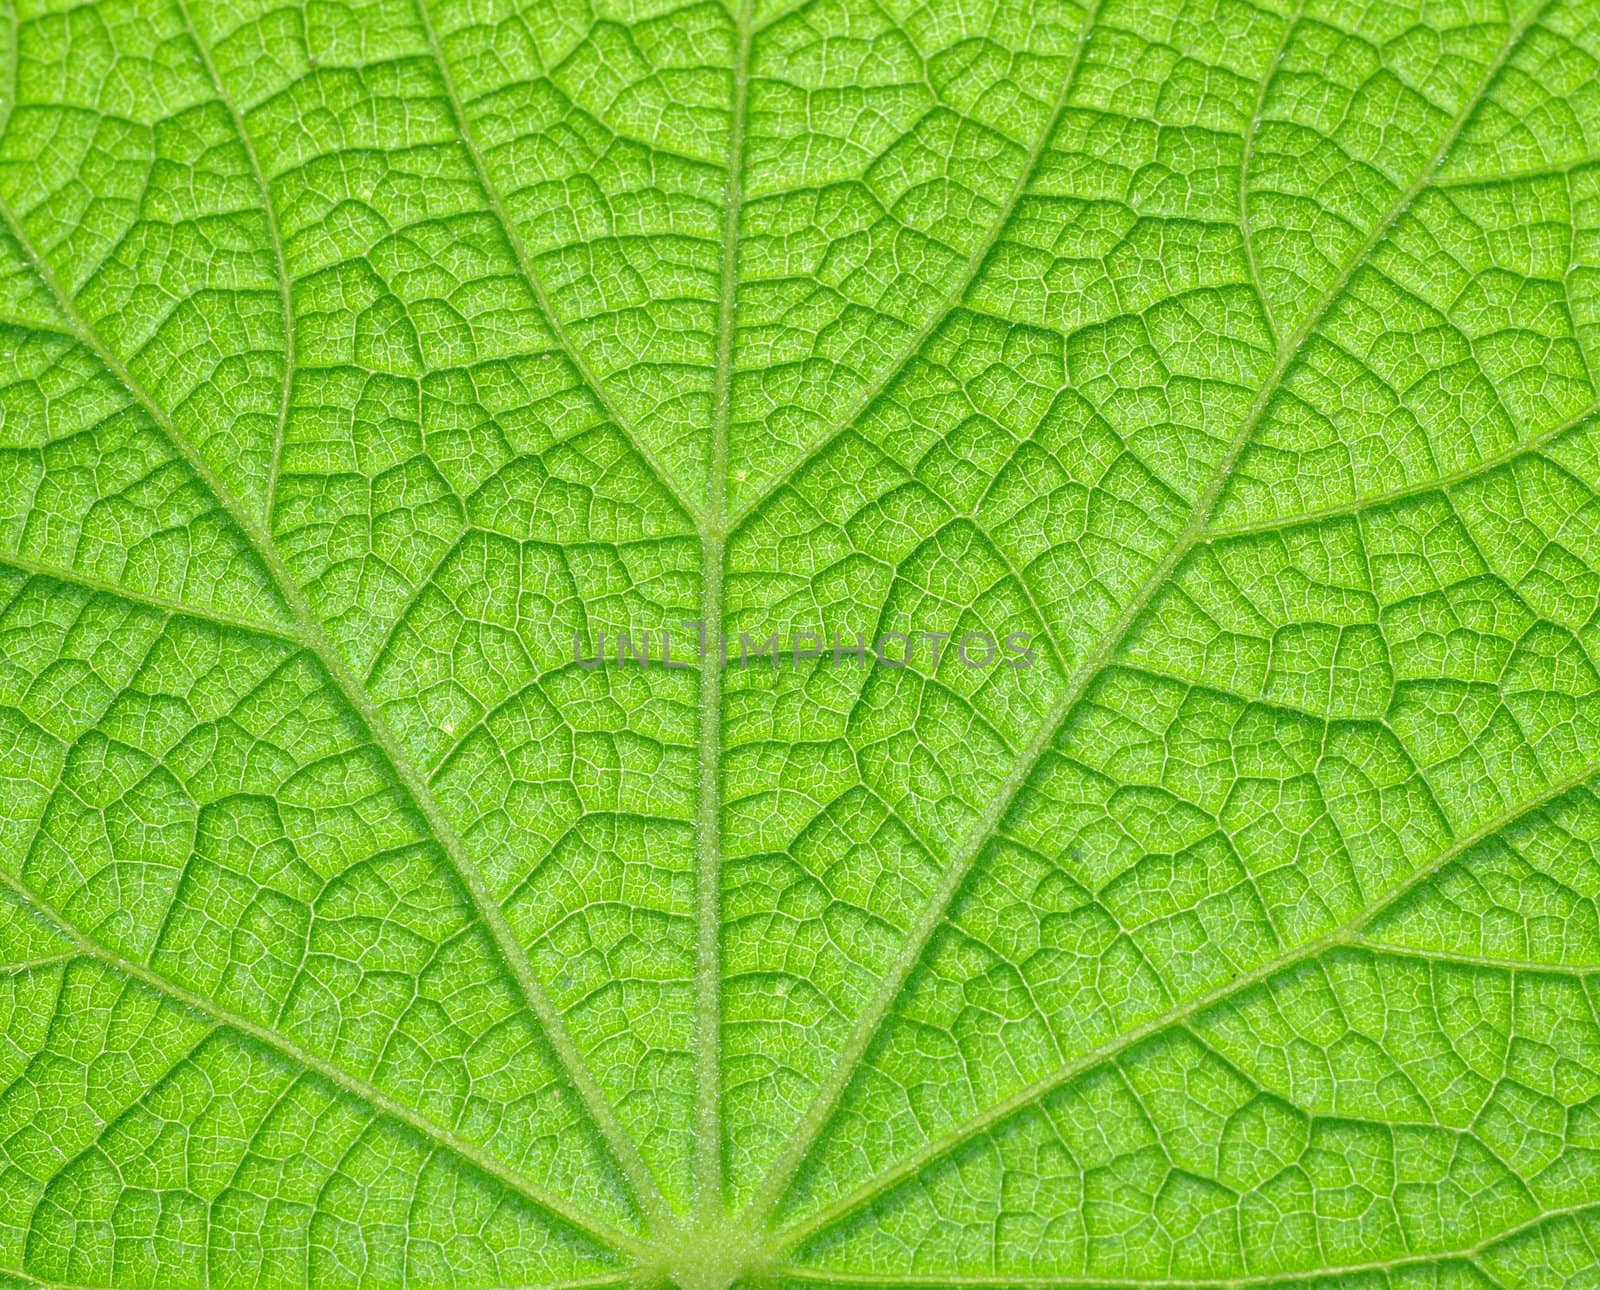 Extreme macro of green leaf with veins like a tree by sommai